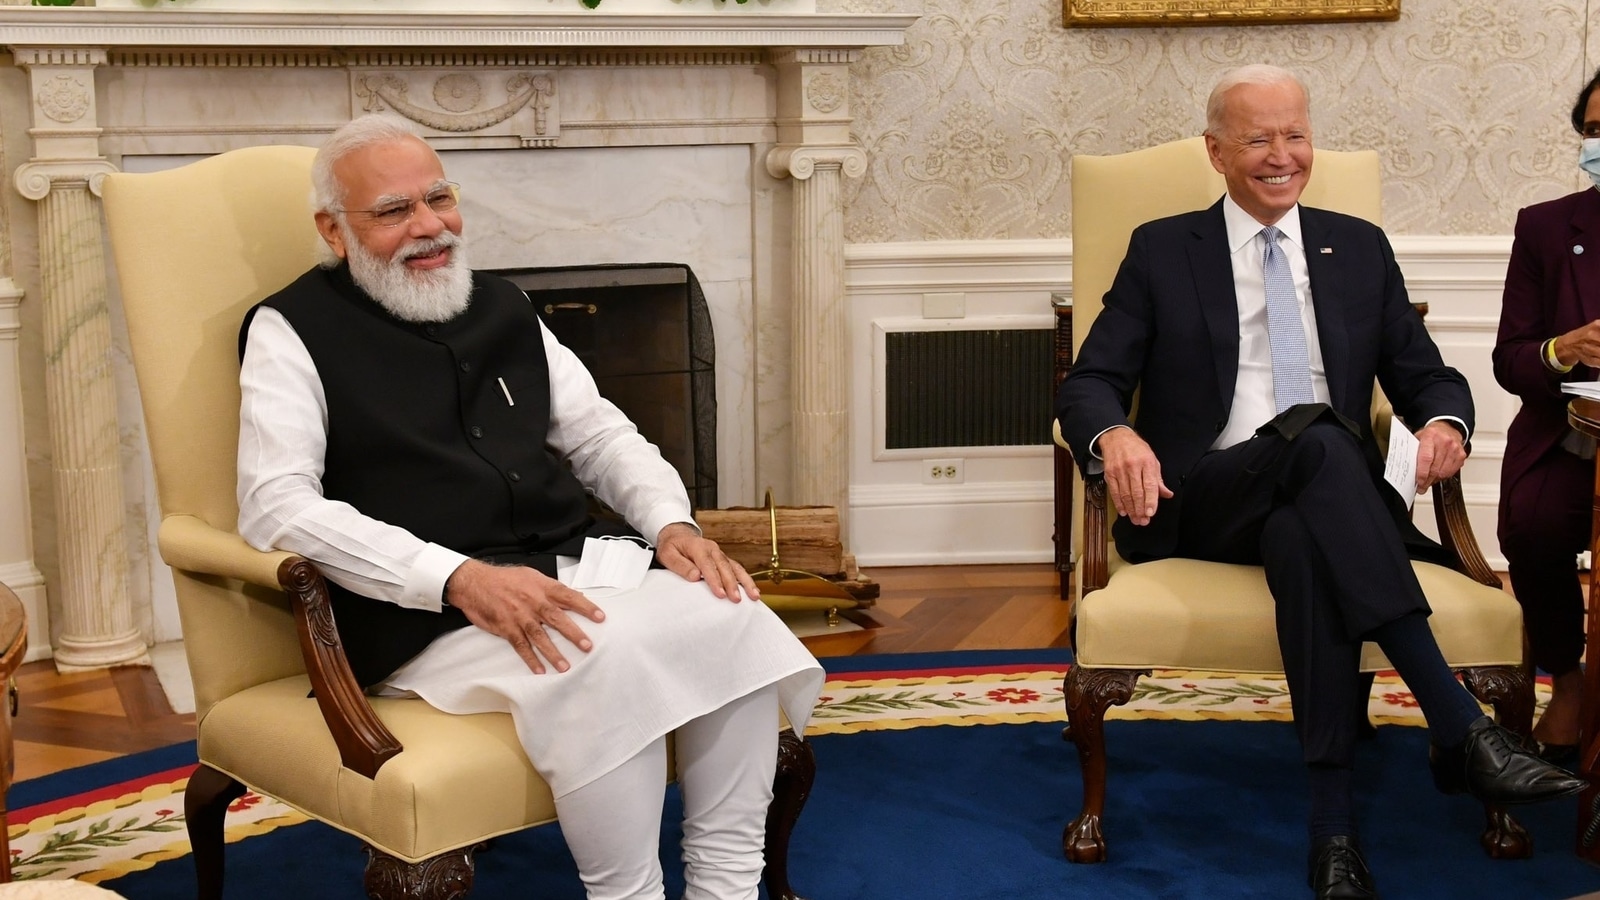 5 Bidens in India: PM Modi, Biden share light moment as Modi says he has  their papers | Latest News India - Hindustan Times